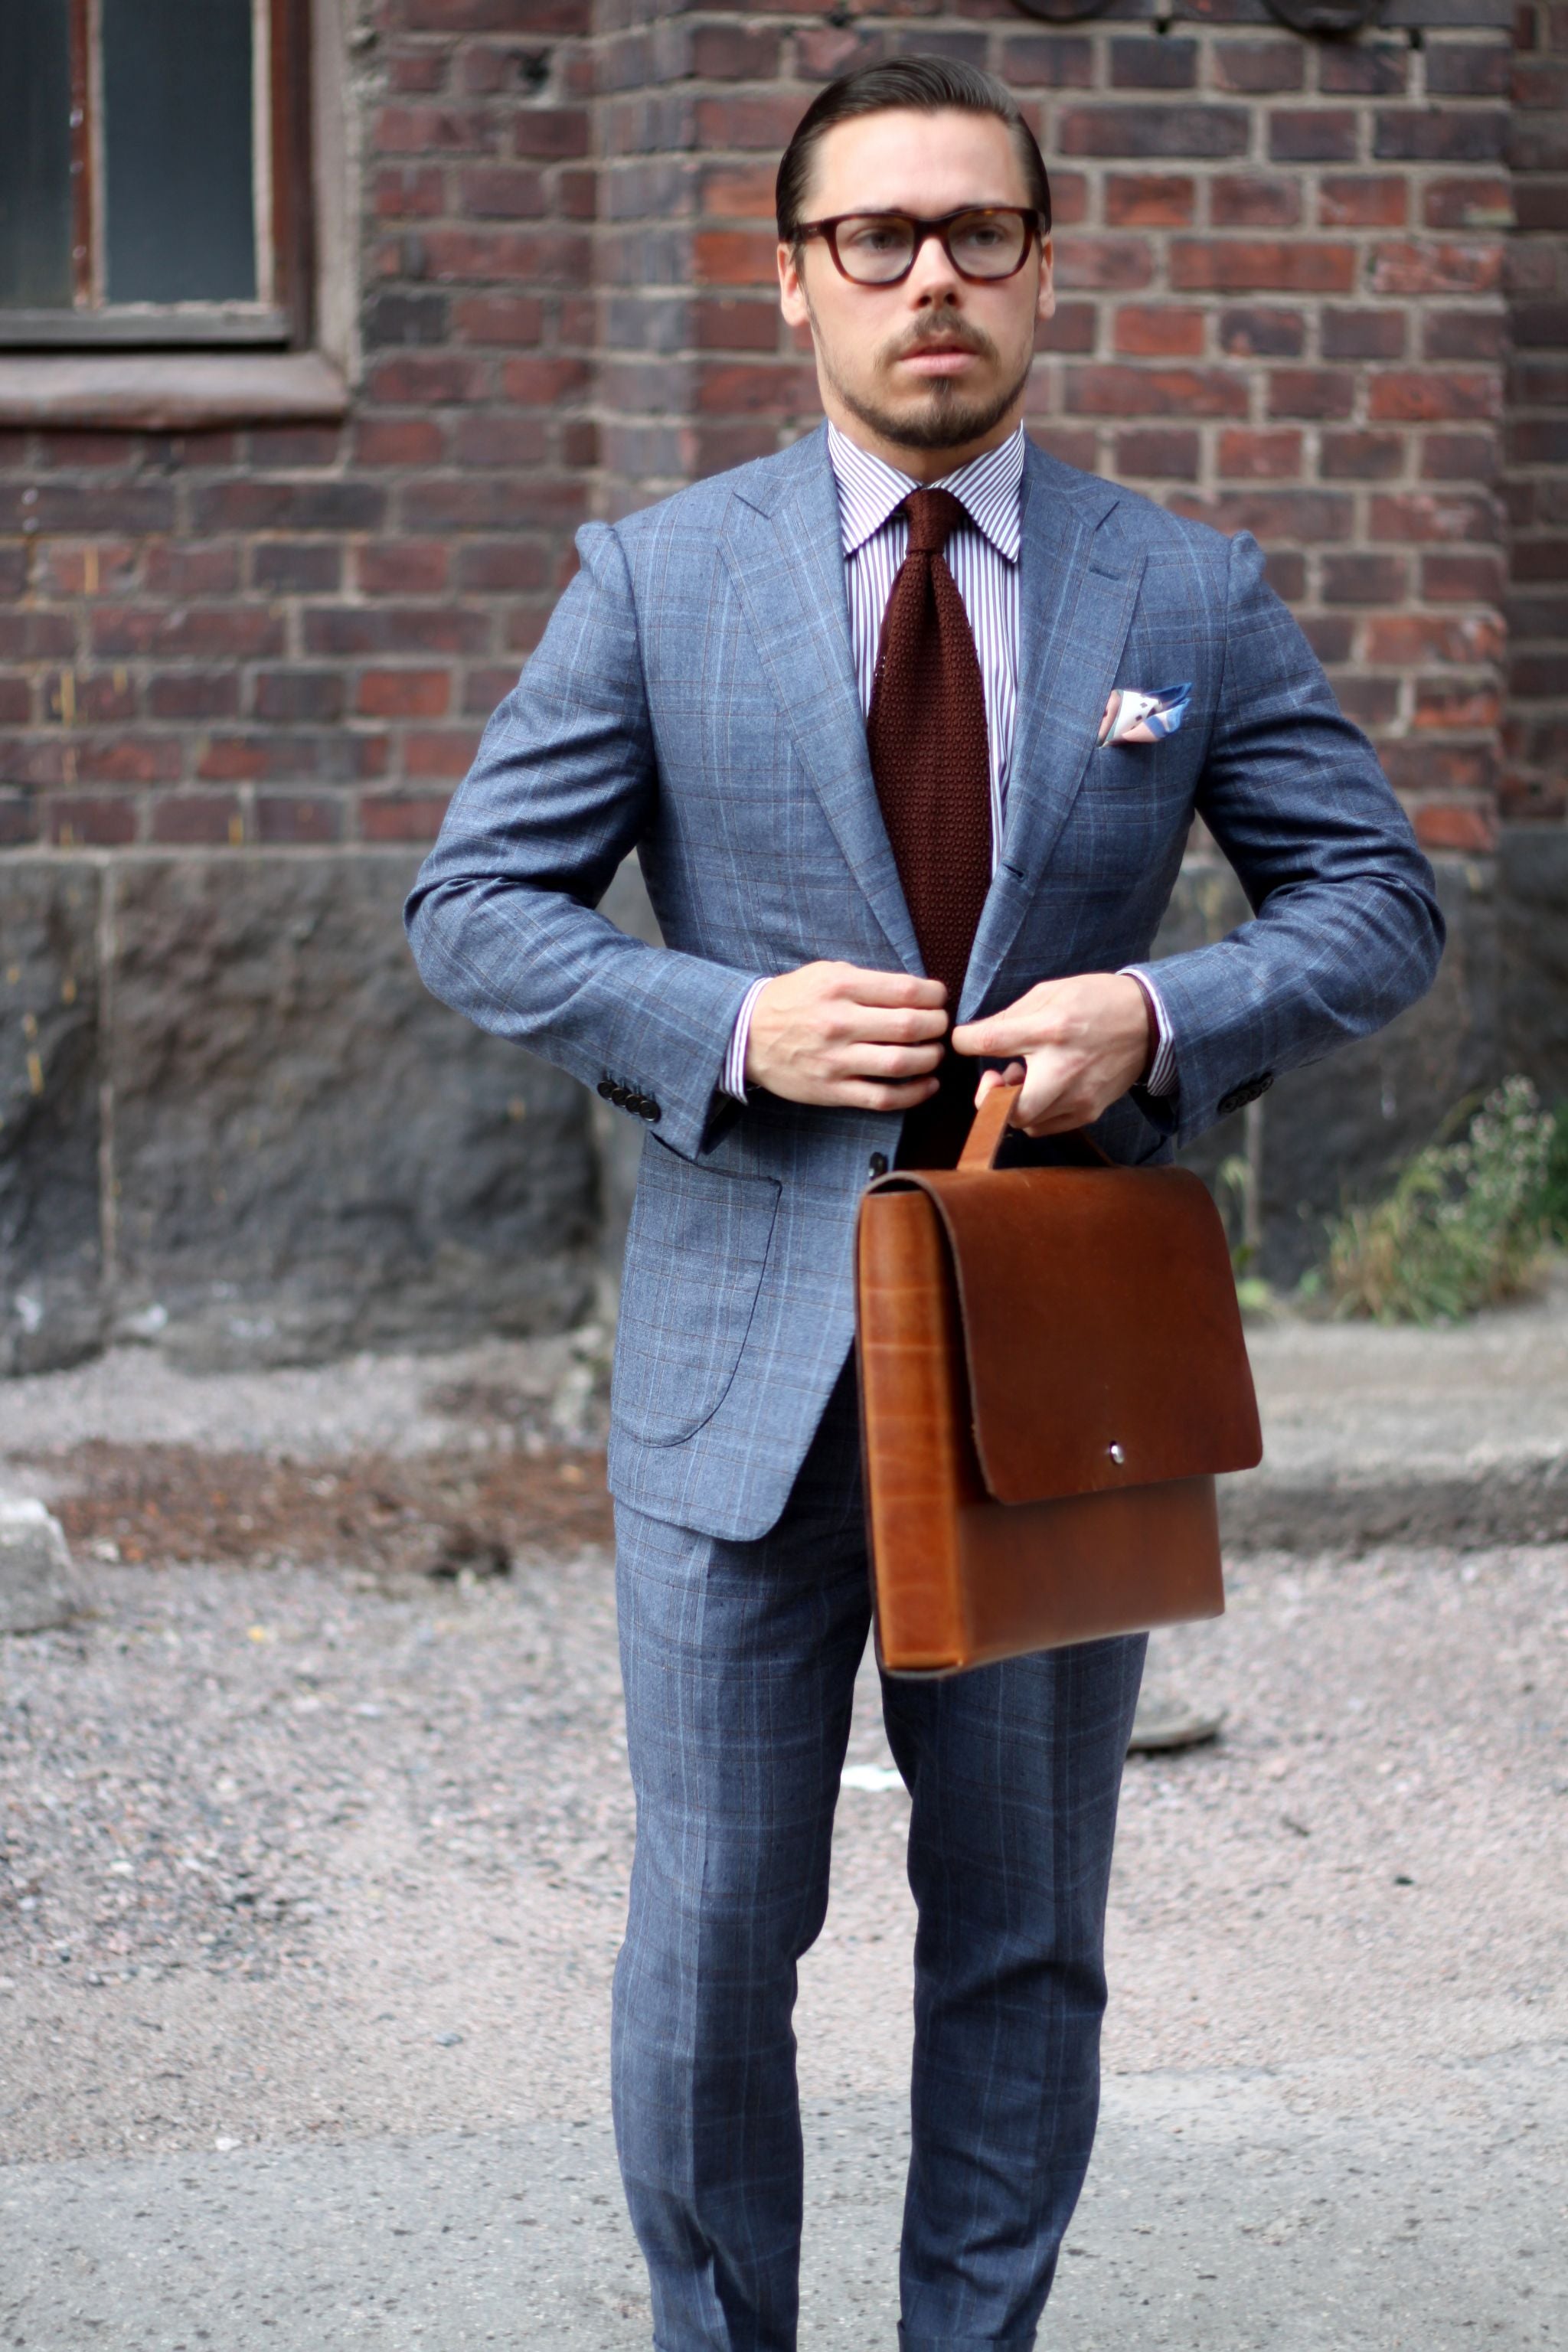 How to wear brown knit tie with suit